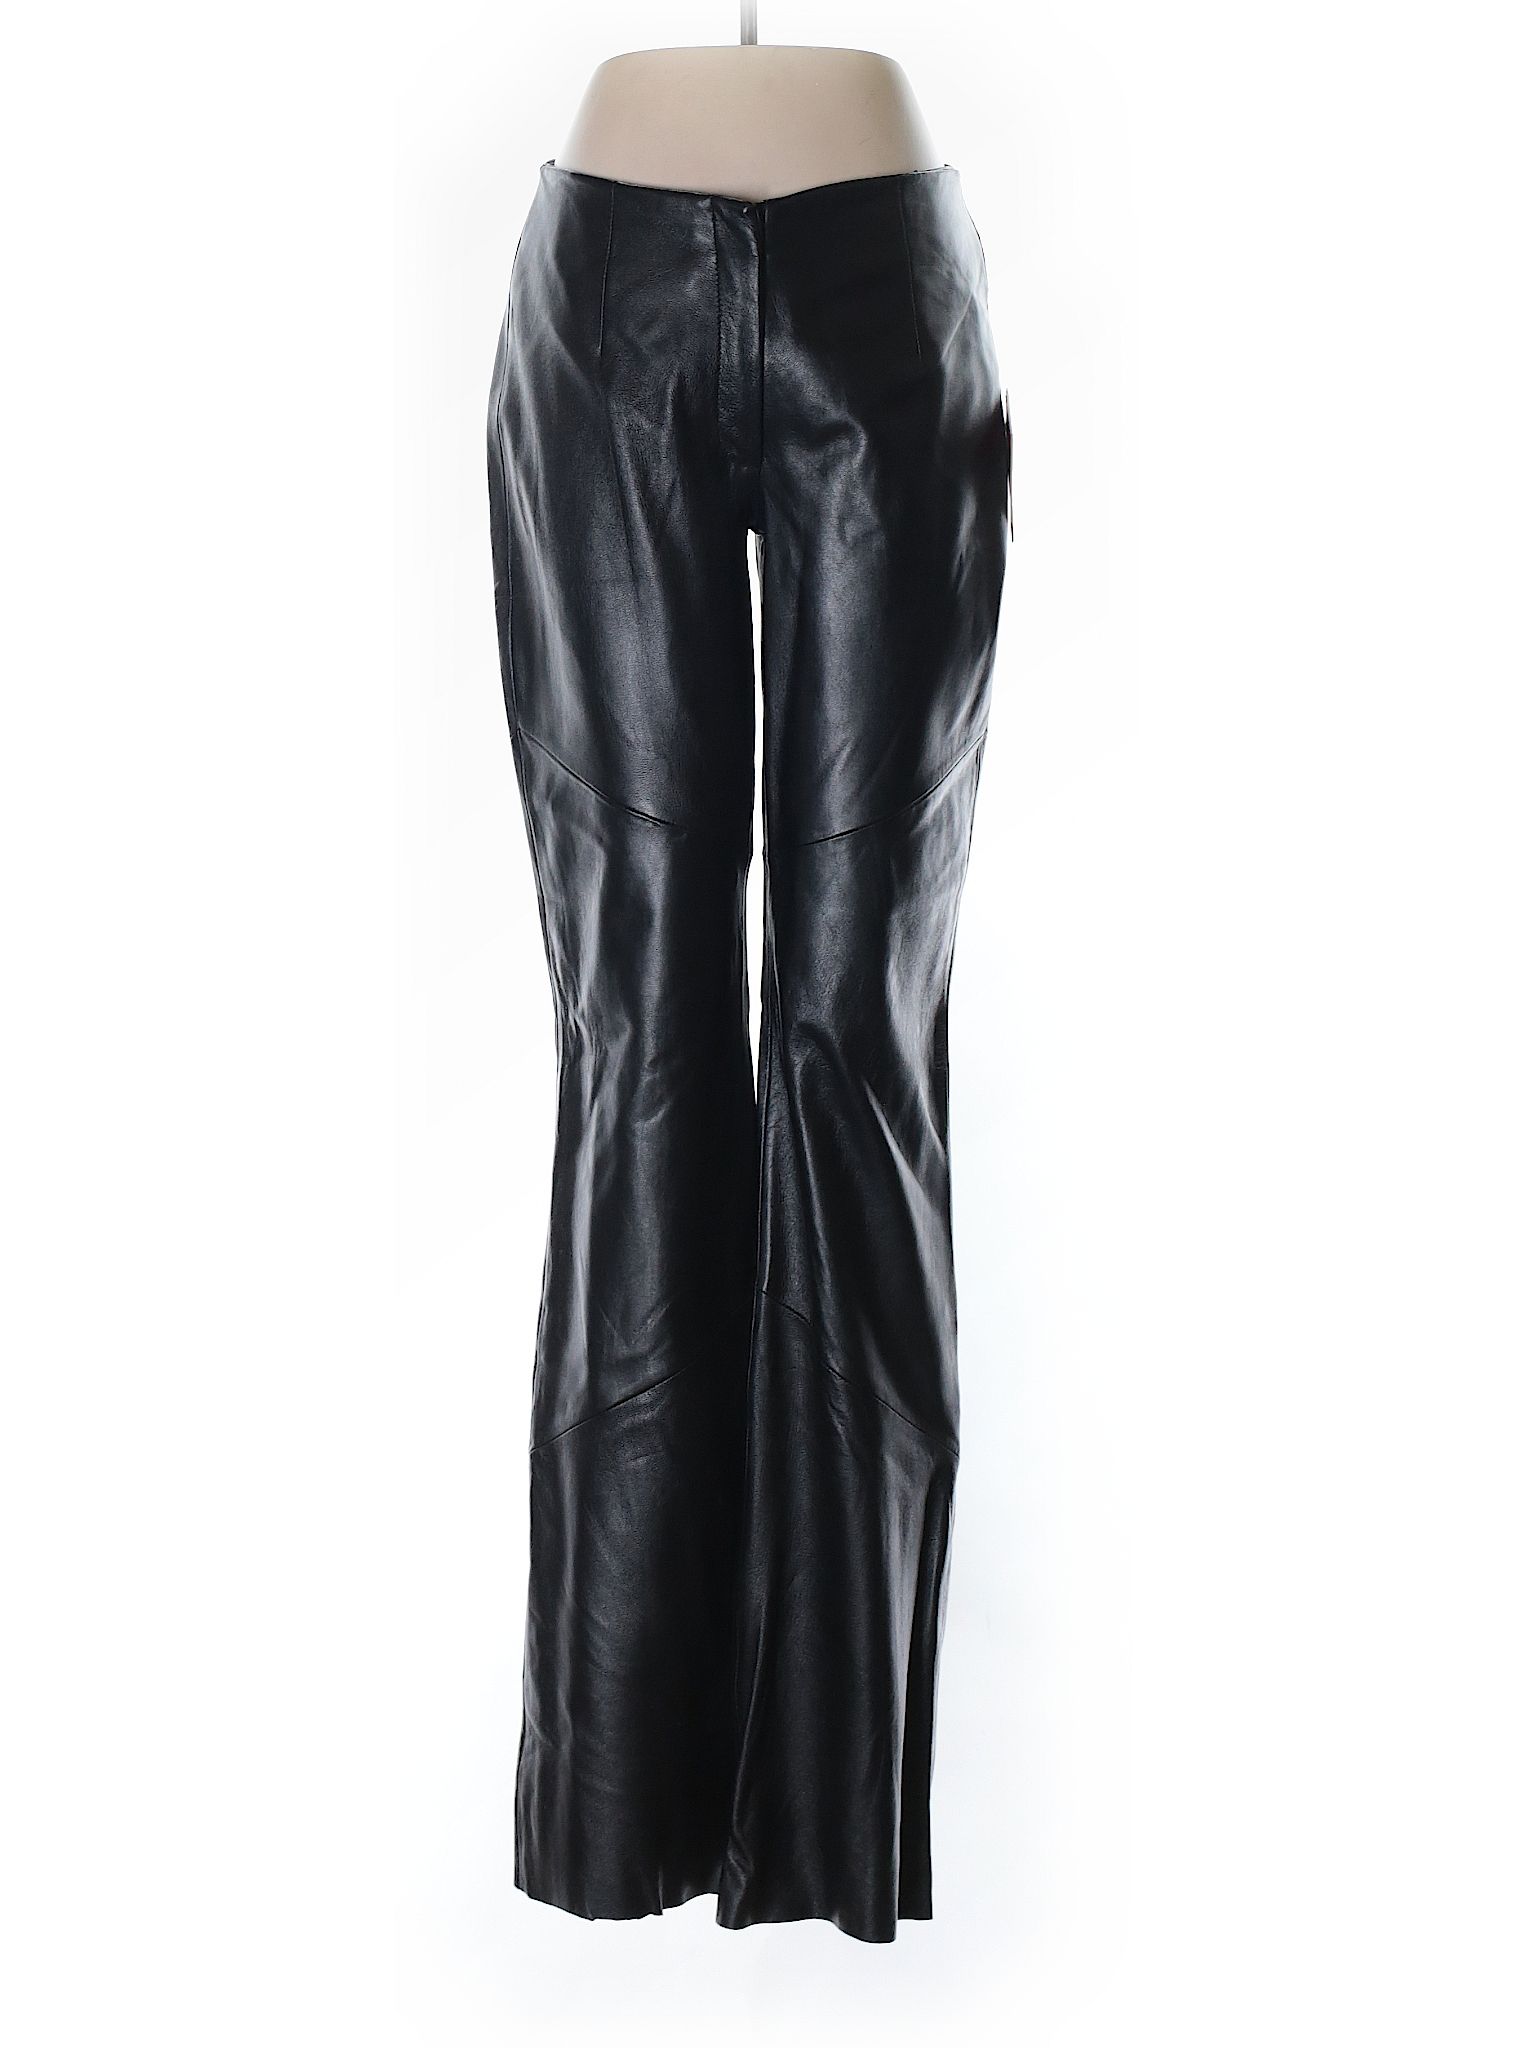 Wilsons Leather Leather Pants Size 4: Black Women's Bottoms - 41798480 | thredUP